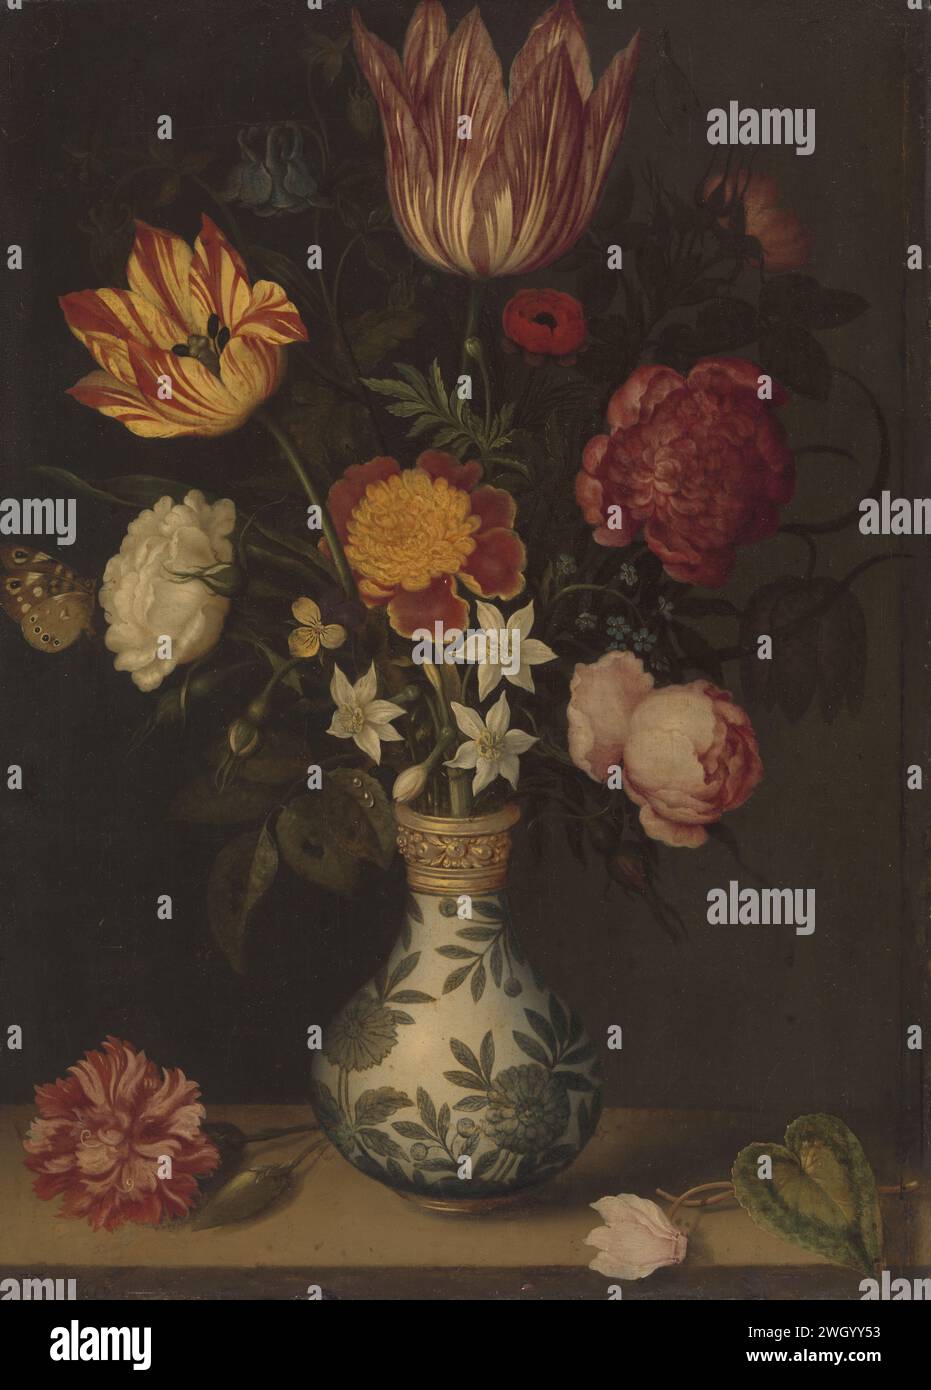 Still Life with Flowers in a Wan-Li Vase, Ambrosius Bosschaert, 1619 painting Still life with flowers in a Wan-Li vase. Bouquet with tulips, roses and daffodils in a vase. On the stone plinth a carnation and a cyclamen.  copper (metal). oil paint (paint)  flowers in a vase. flowers: rose. flowers: tulip. flowers: narcissus. flowers: carnation. container of ceramics: jar, jug, pot, vase Stock Photo